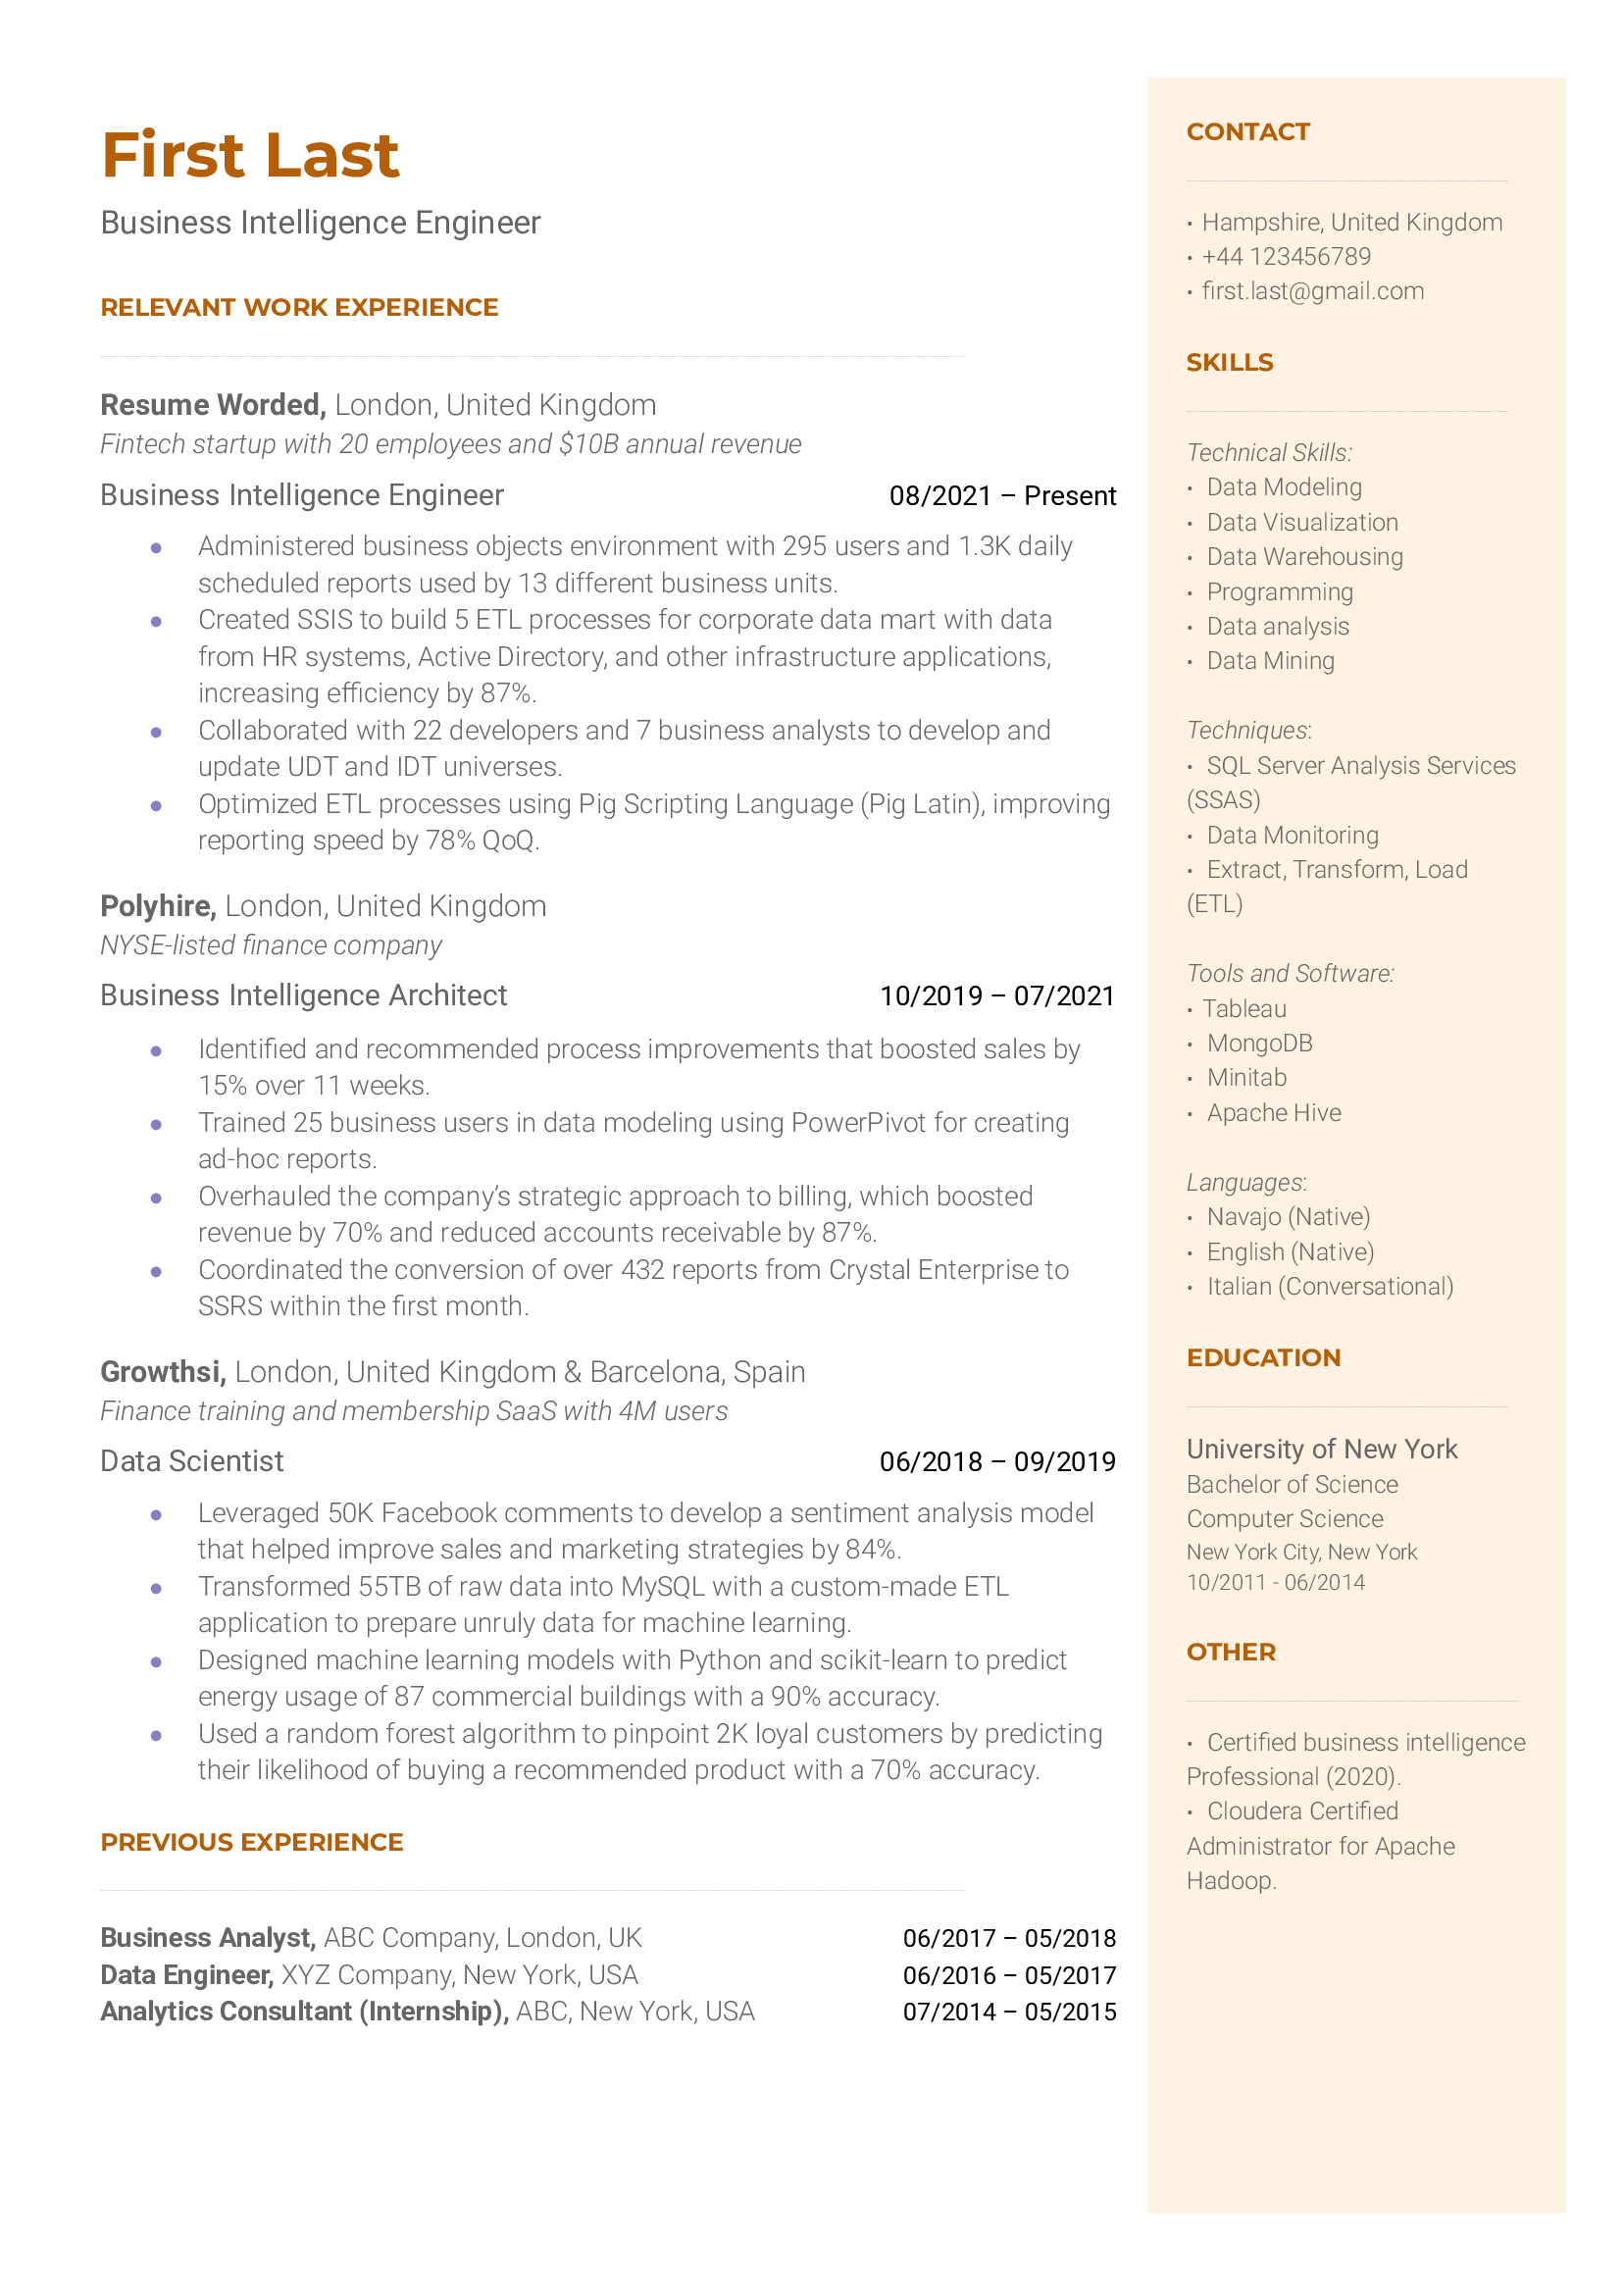 A well-structured CV for a Business Intelligence Engineer role, showcasing technical skills and data storytelling abilities.